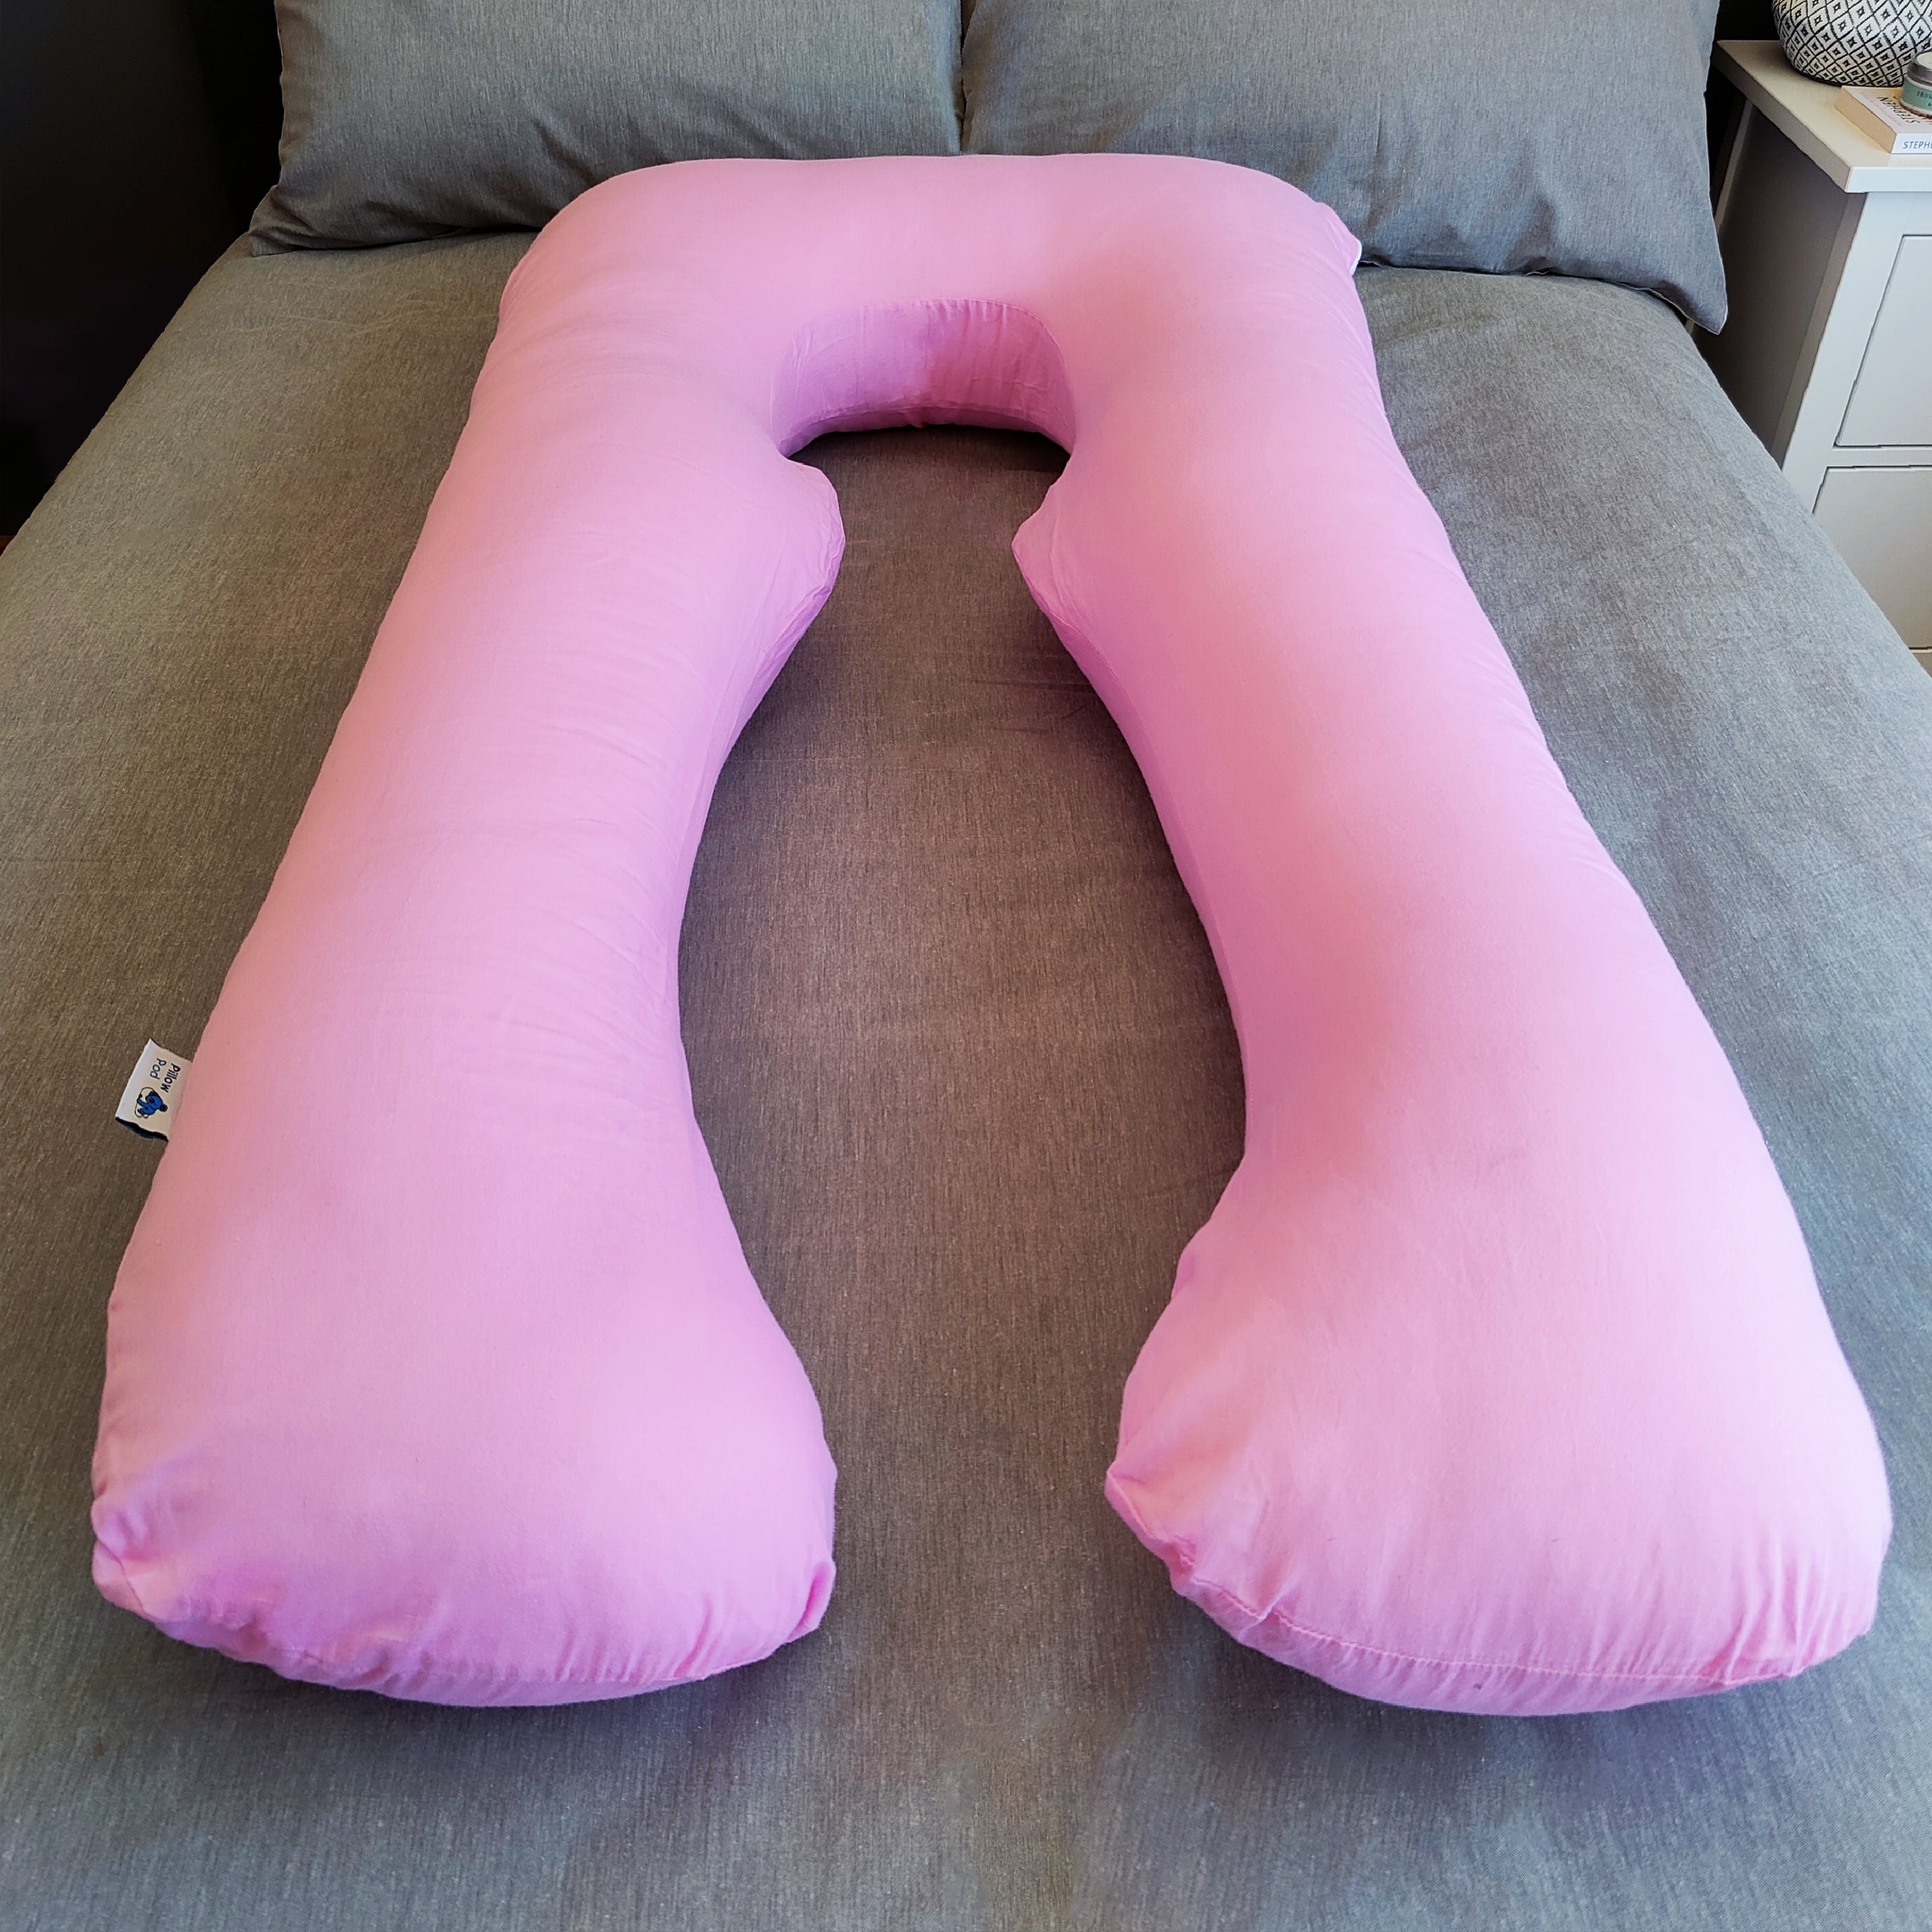 Pink Pillow Pod Full Body Support Pillow on Bed, with Plain Grey Bed Spread